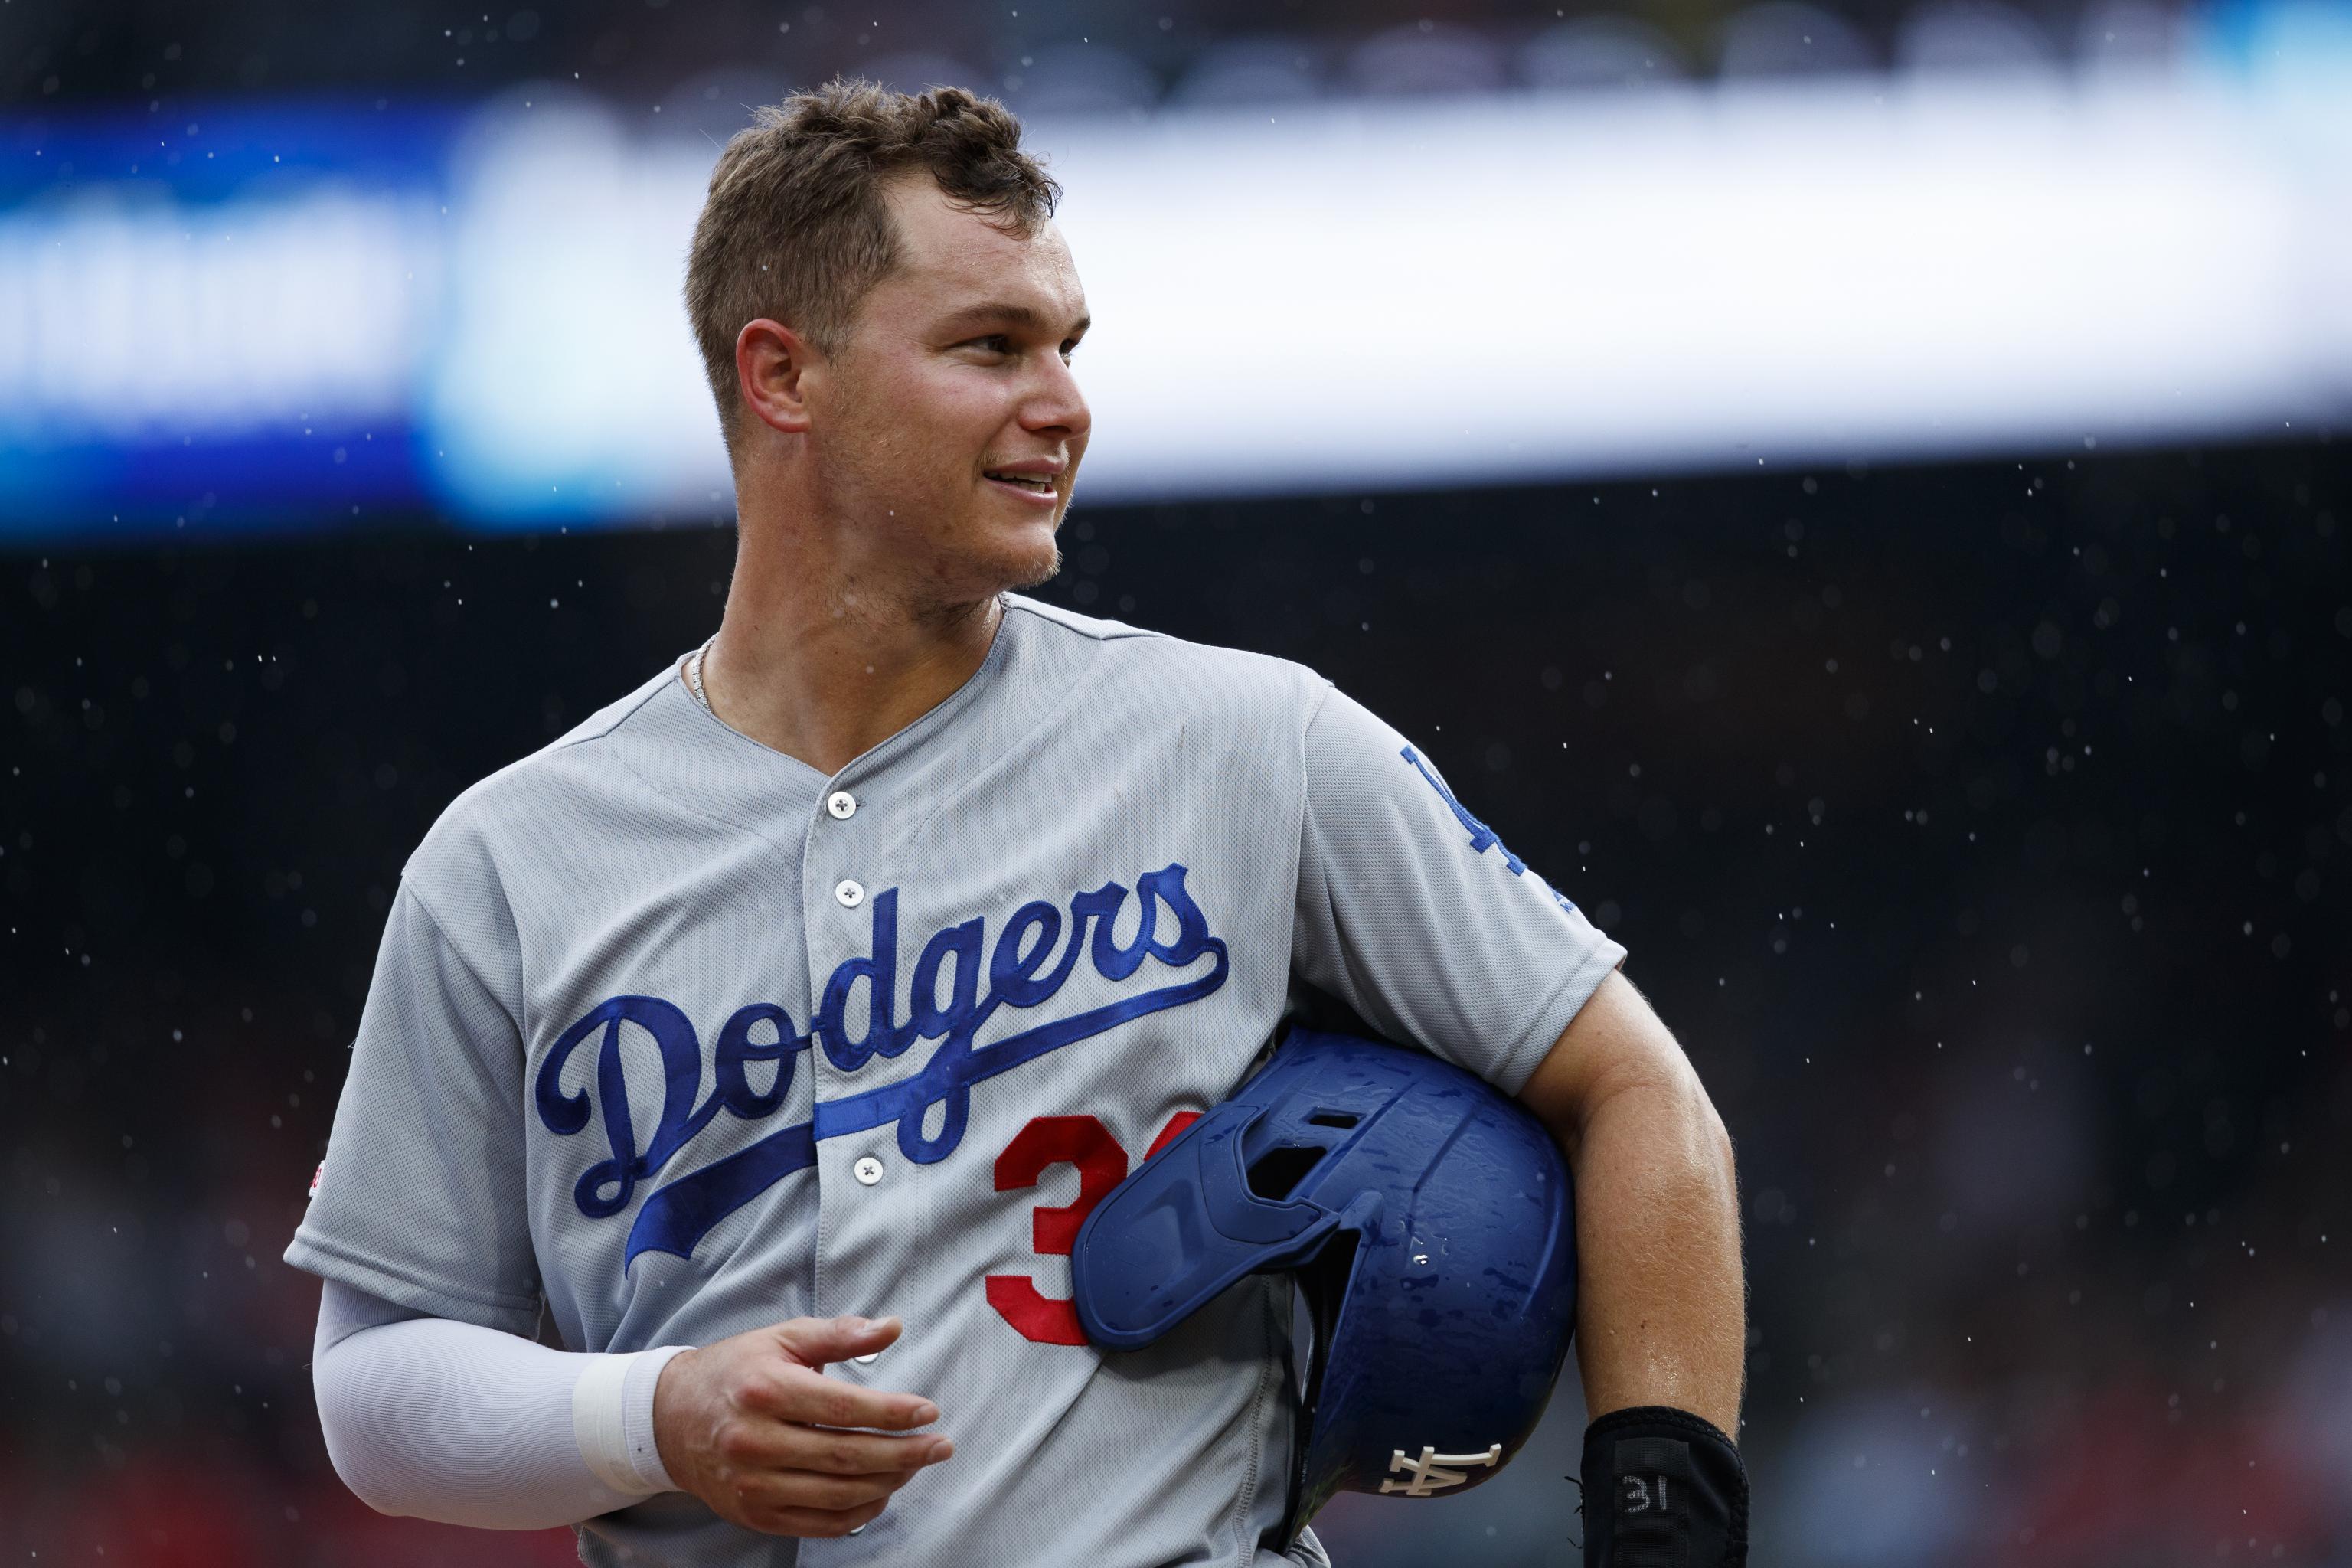 L.A. Dodgers rookie Joc Pederson has been simply dazzling in